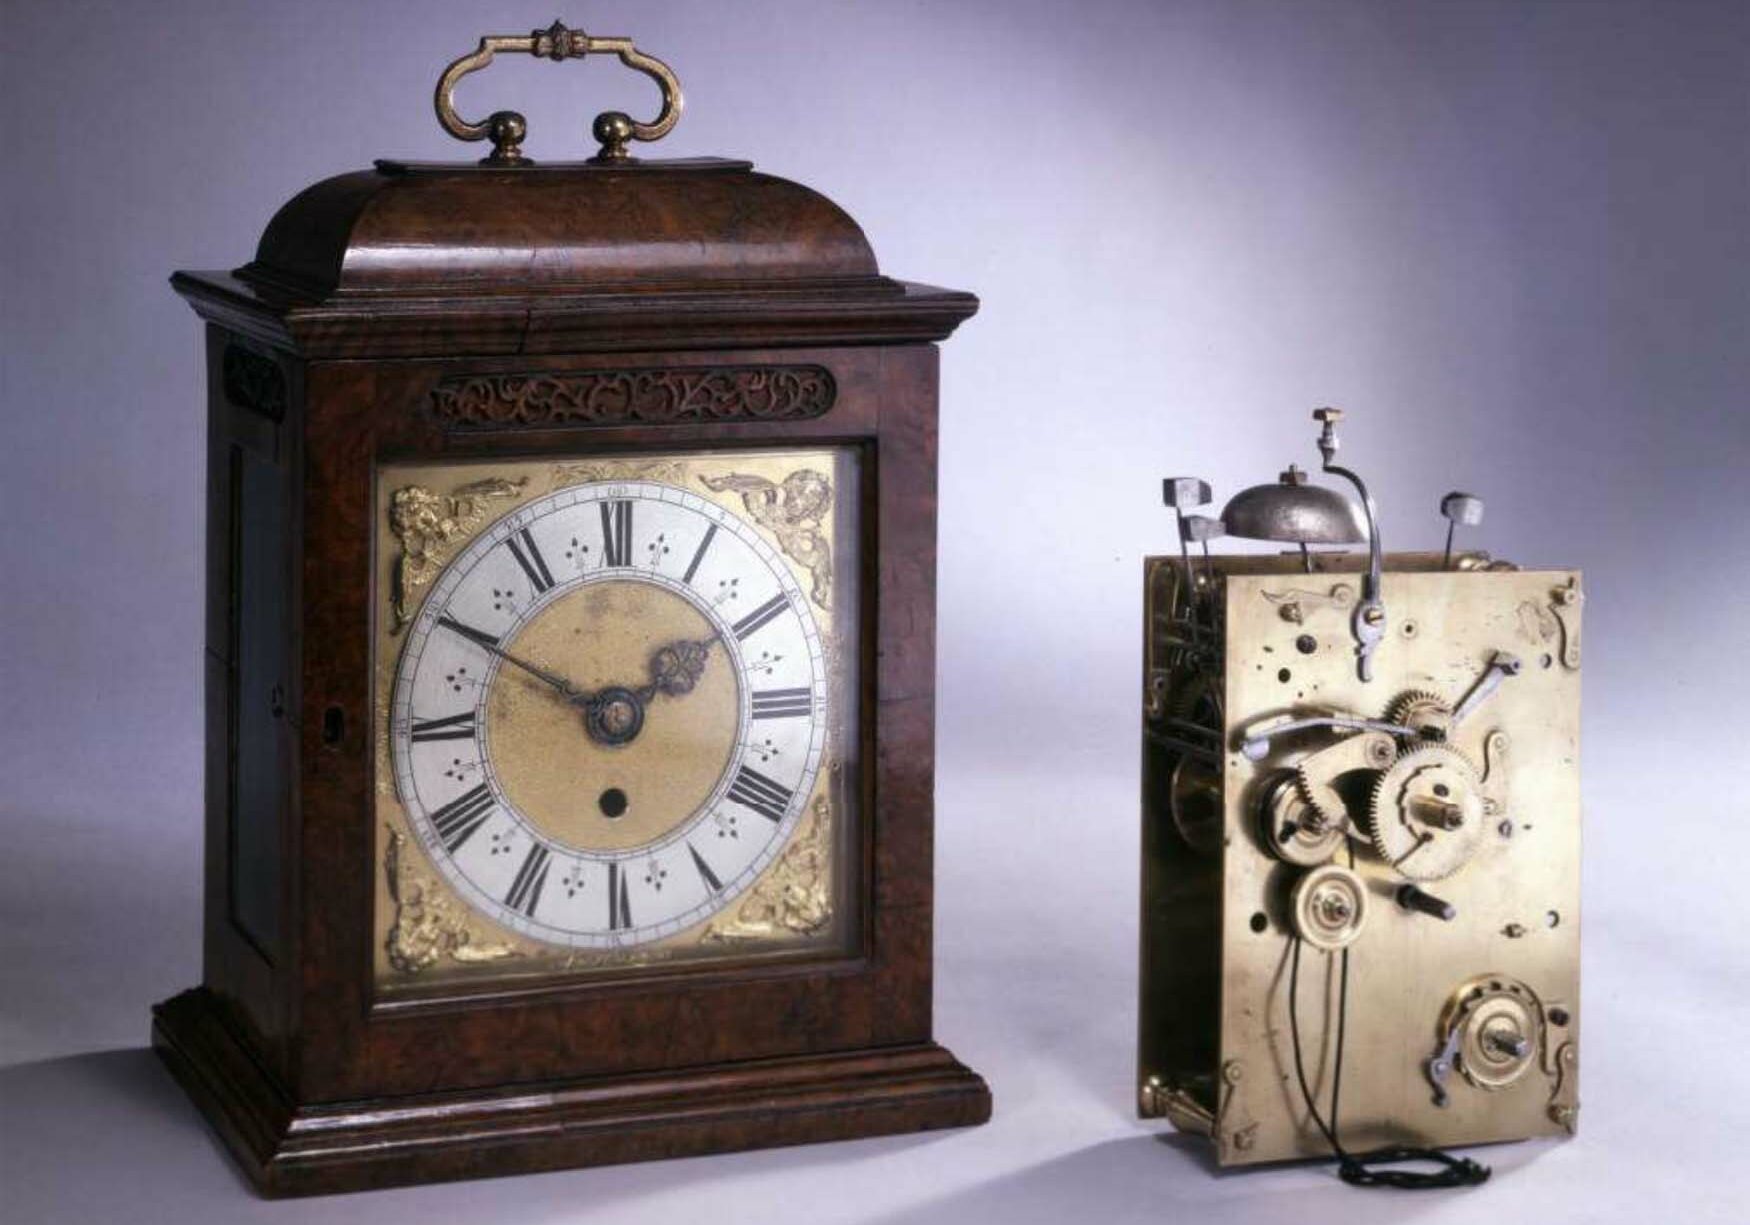 Repeating table clock 1670s